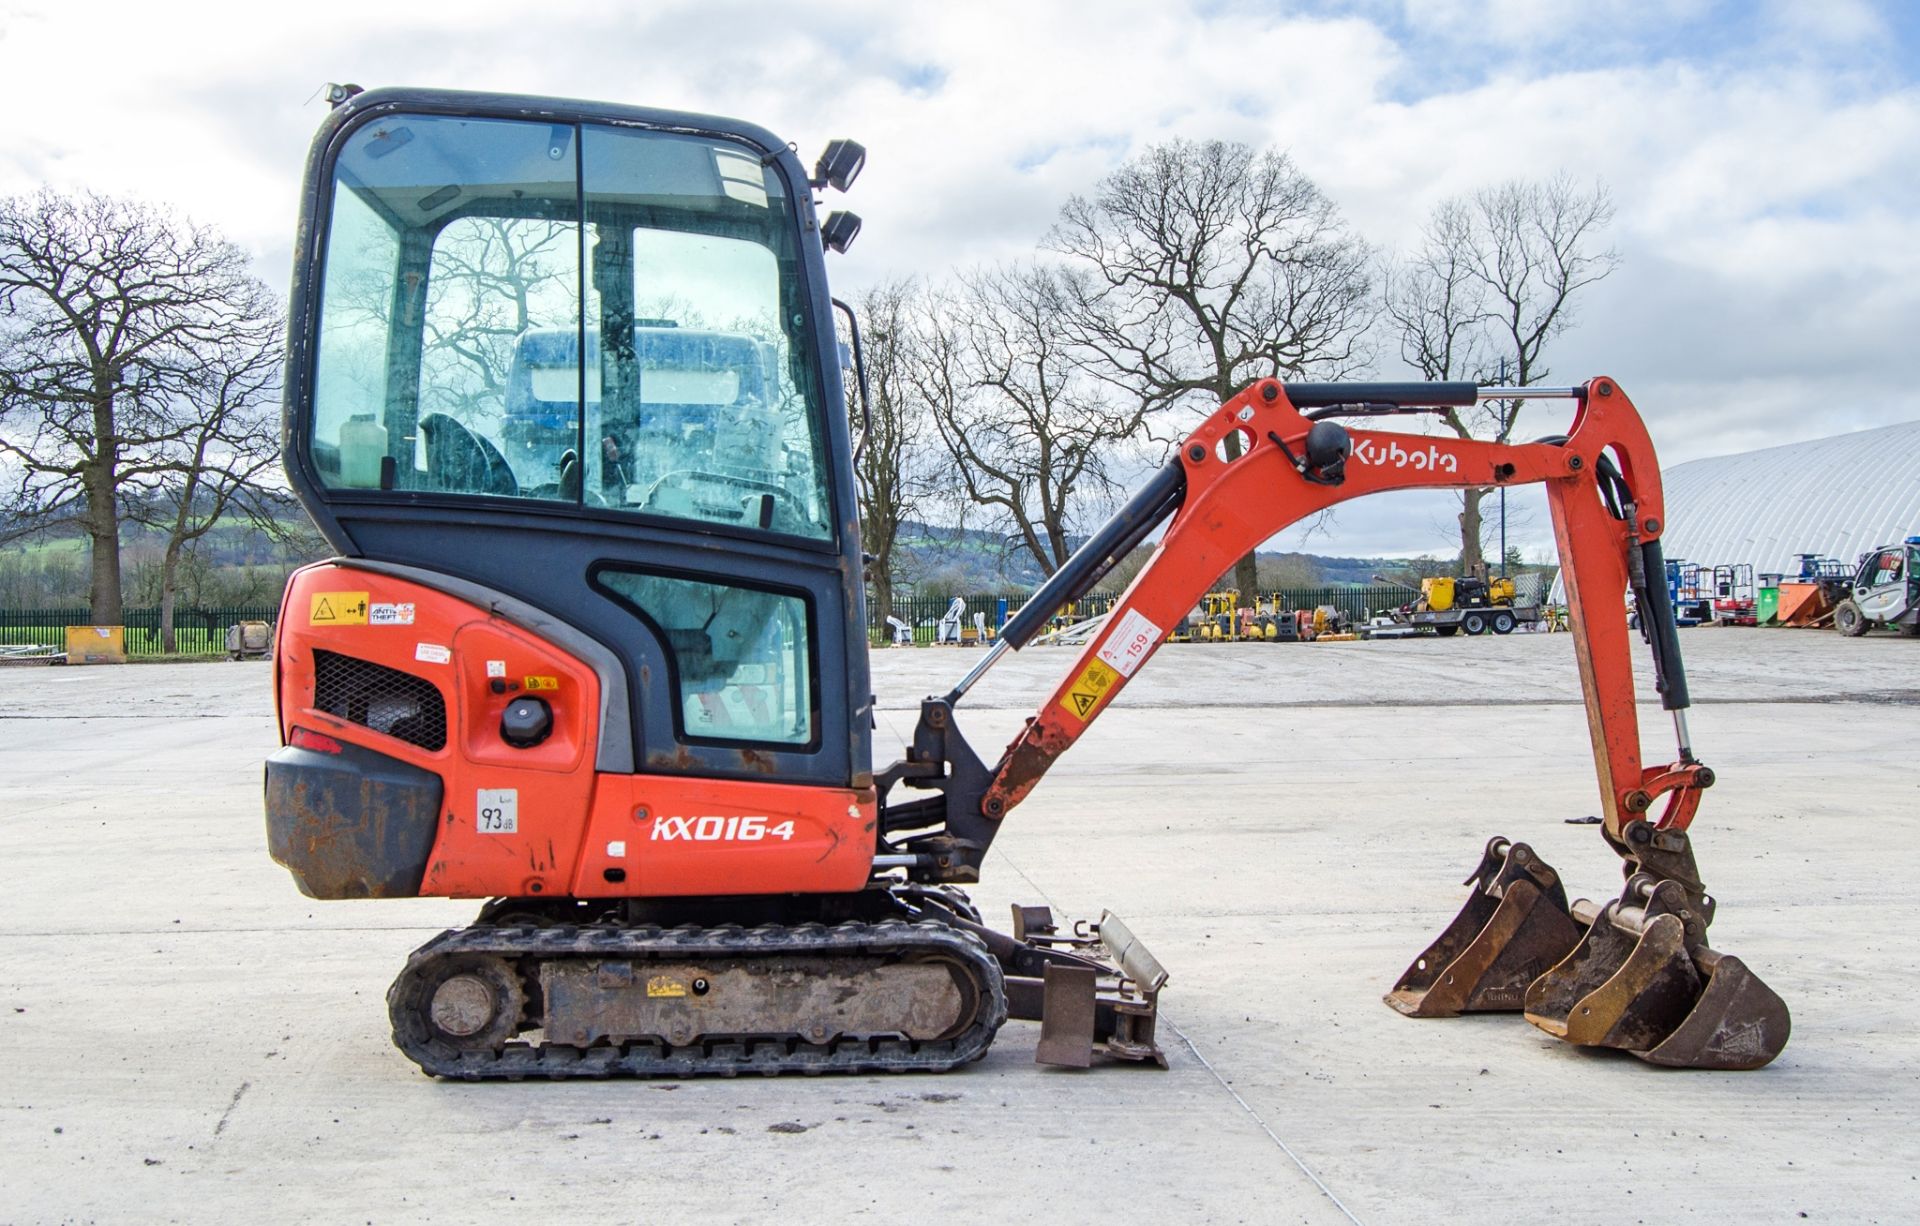 Kubota KX016-4 1.5 tonne rubber tracked excavator Year: 2017 S/N: 61044 Recorded Hours: 2260 - Image 7 of 26